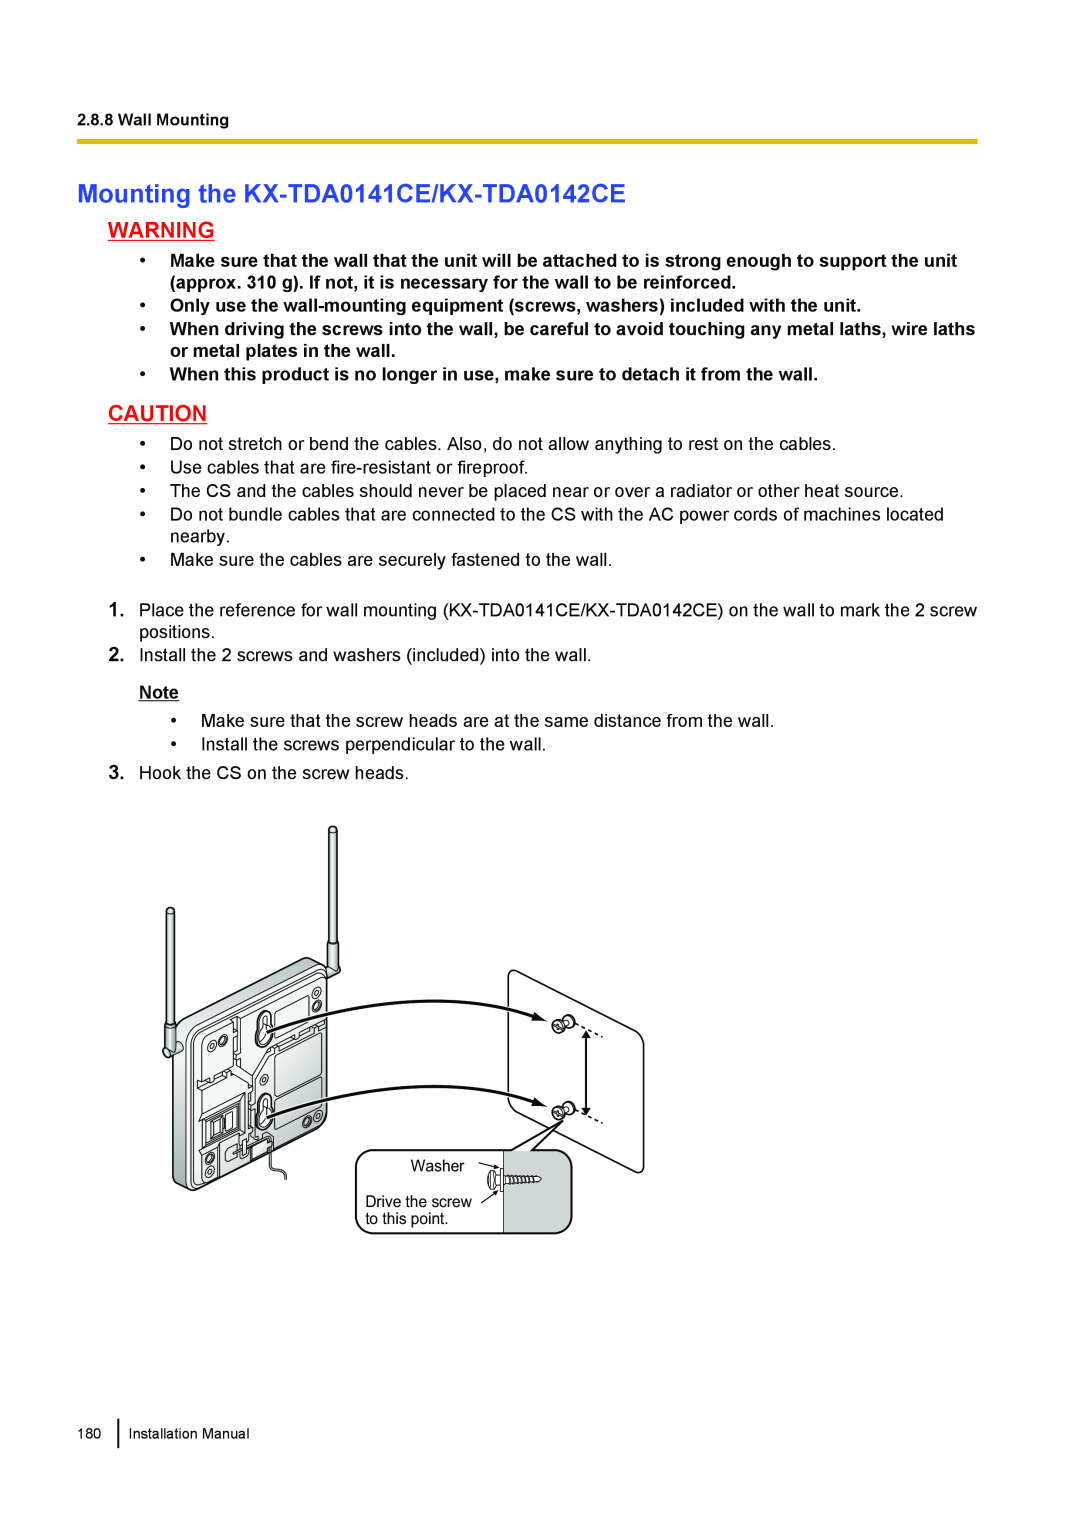 Panasonic KX-TDA100 installation manual Mounting the KX-TDA0141CE/KX-TDA0142CE, Washer Drive the screw to this point 